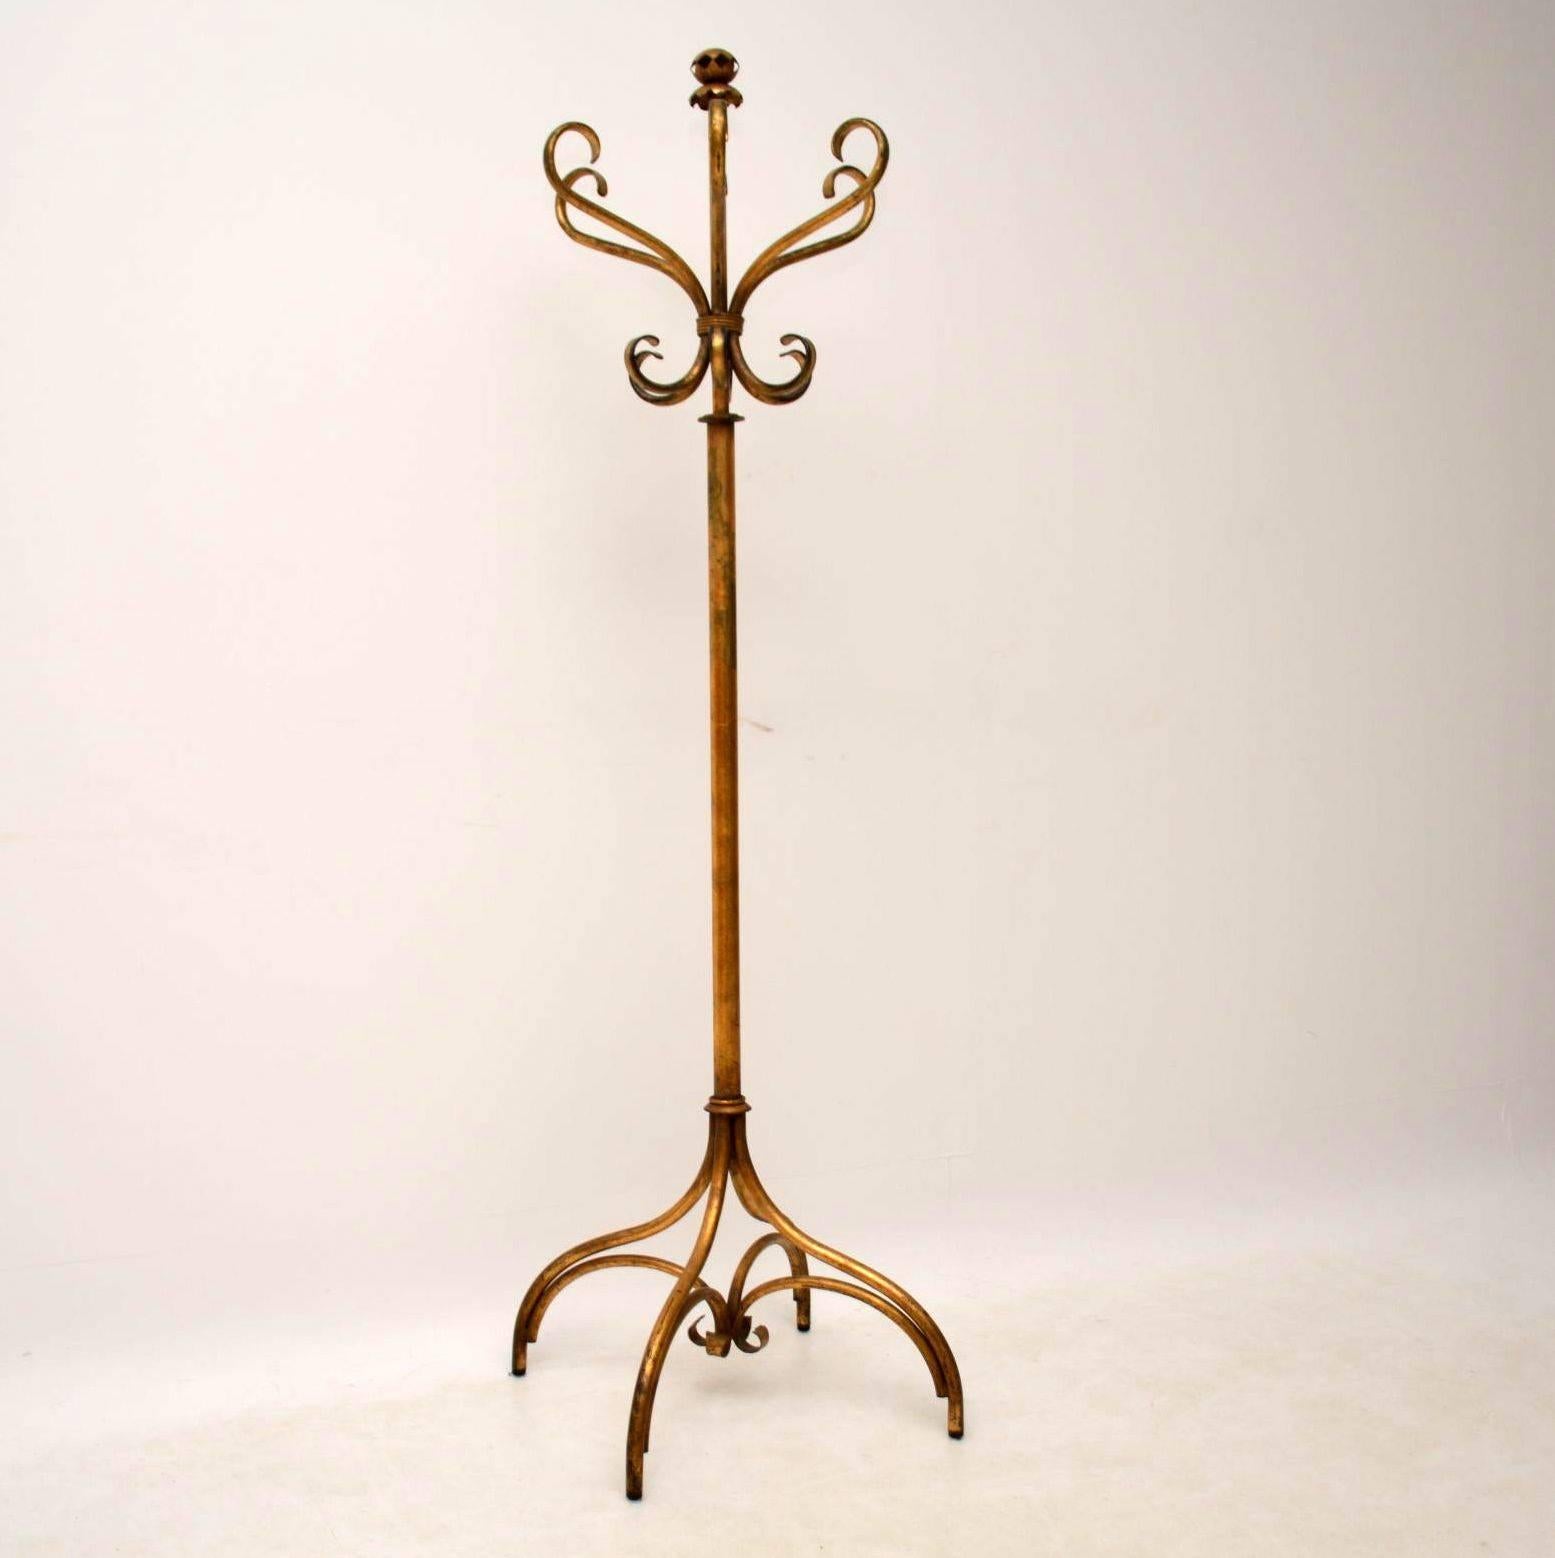 Antique gilt metal hat/coat stand in the style of an original Thonet bentwood hat/coat stand. This a very unusual item and must be a designer piece and my guess is that it's possibly Italian. The gilt work is naturally aged and you can see the base